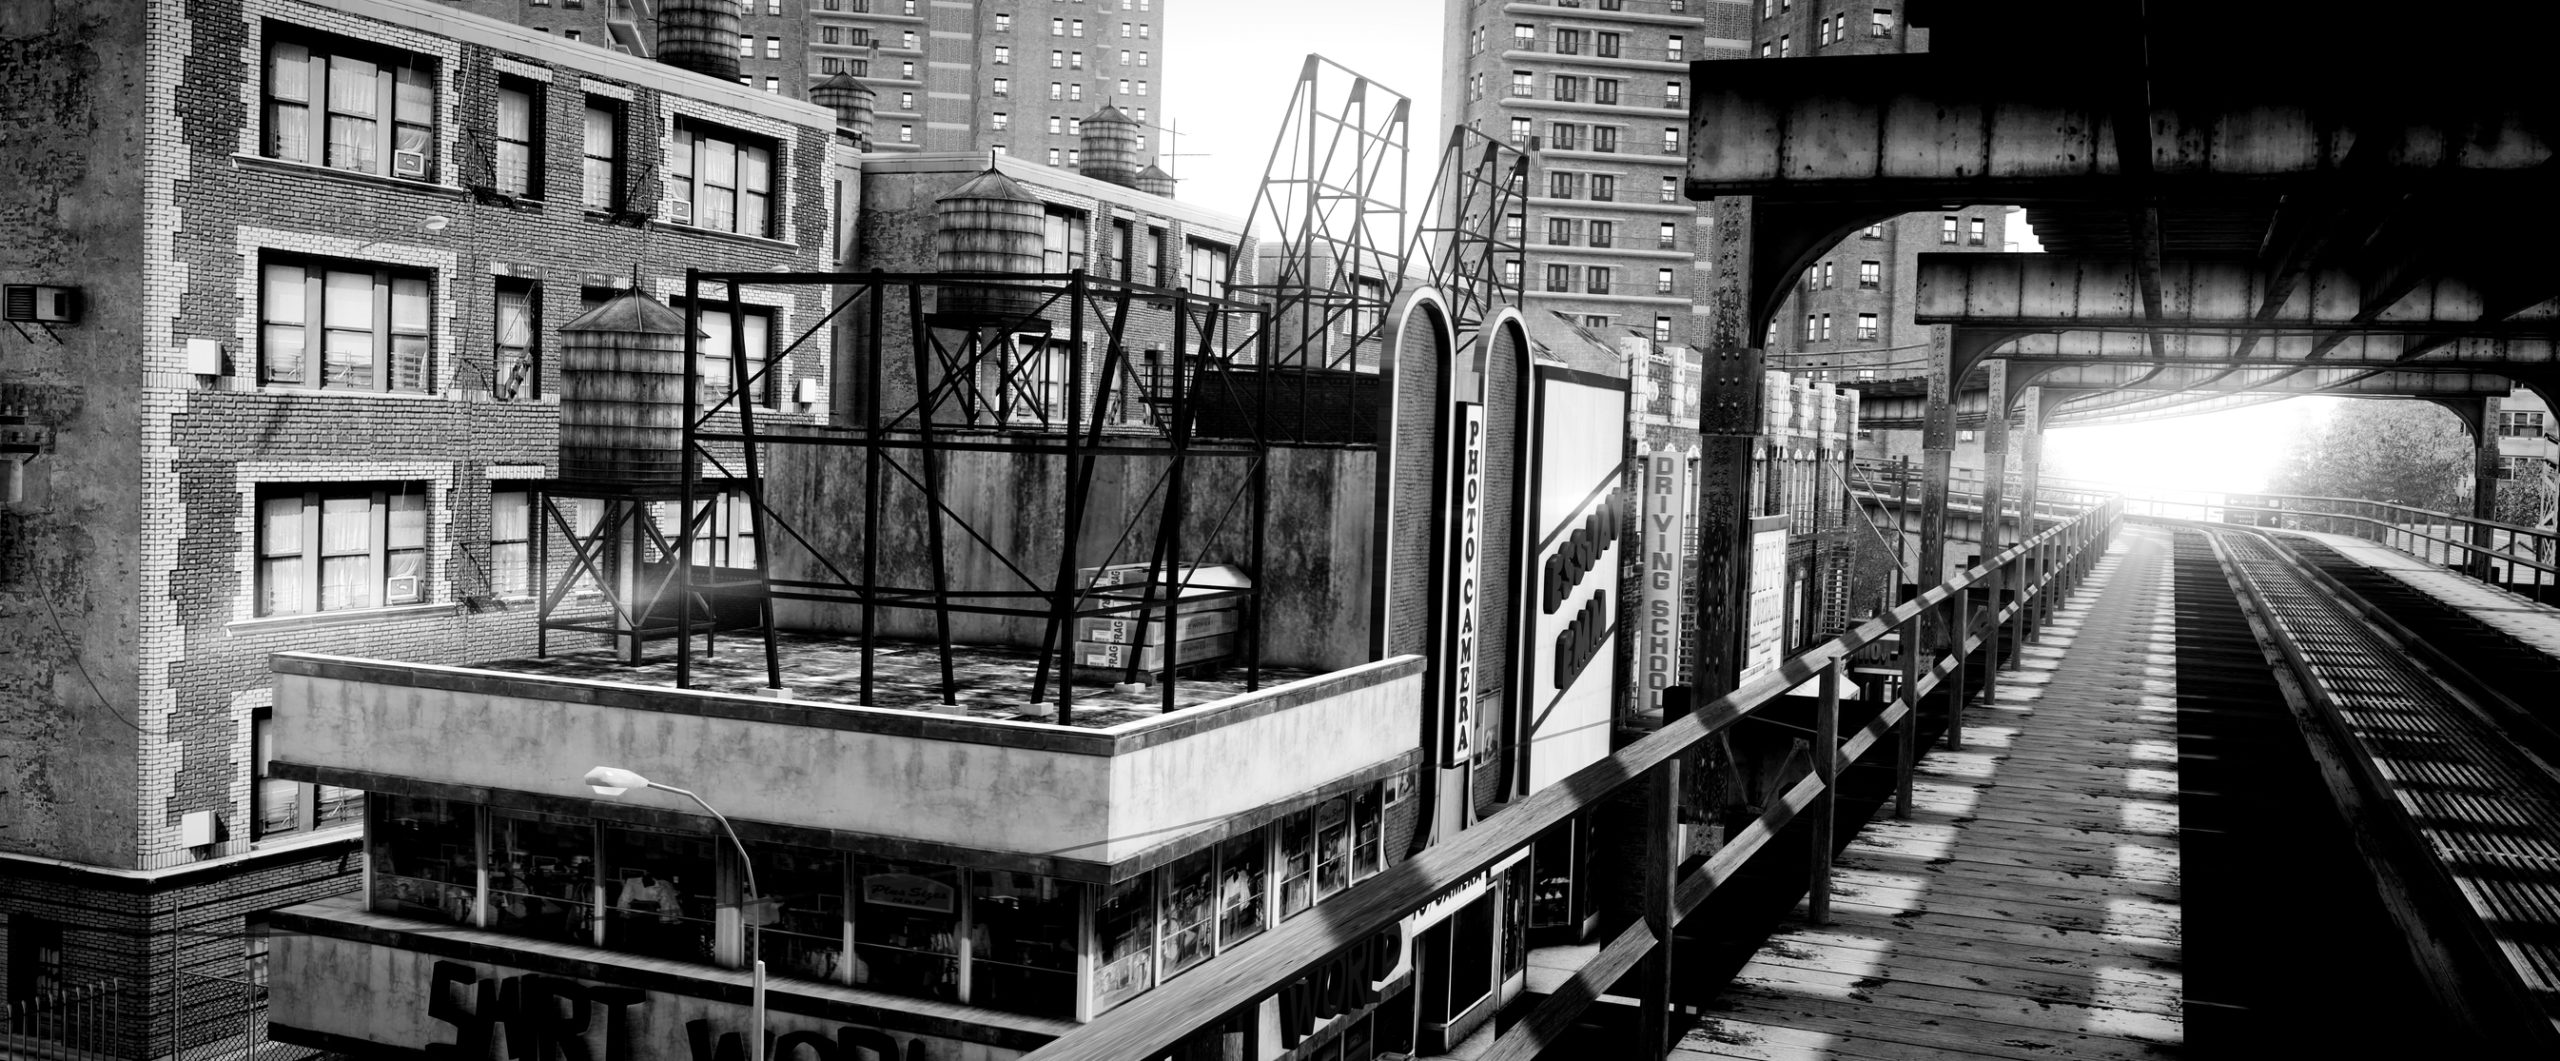 Grand Theft Auto IV Looks Marvellous In Black And White